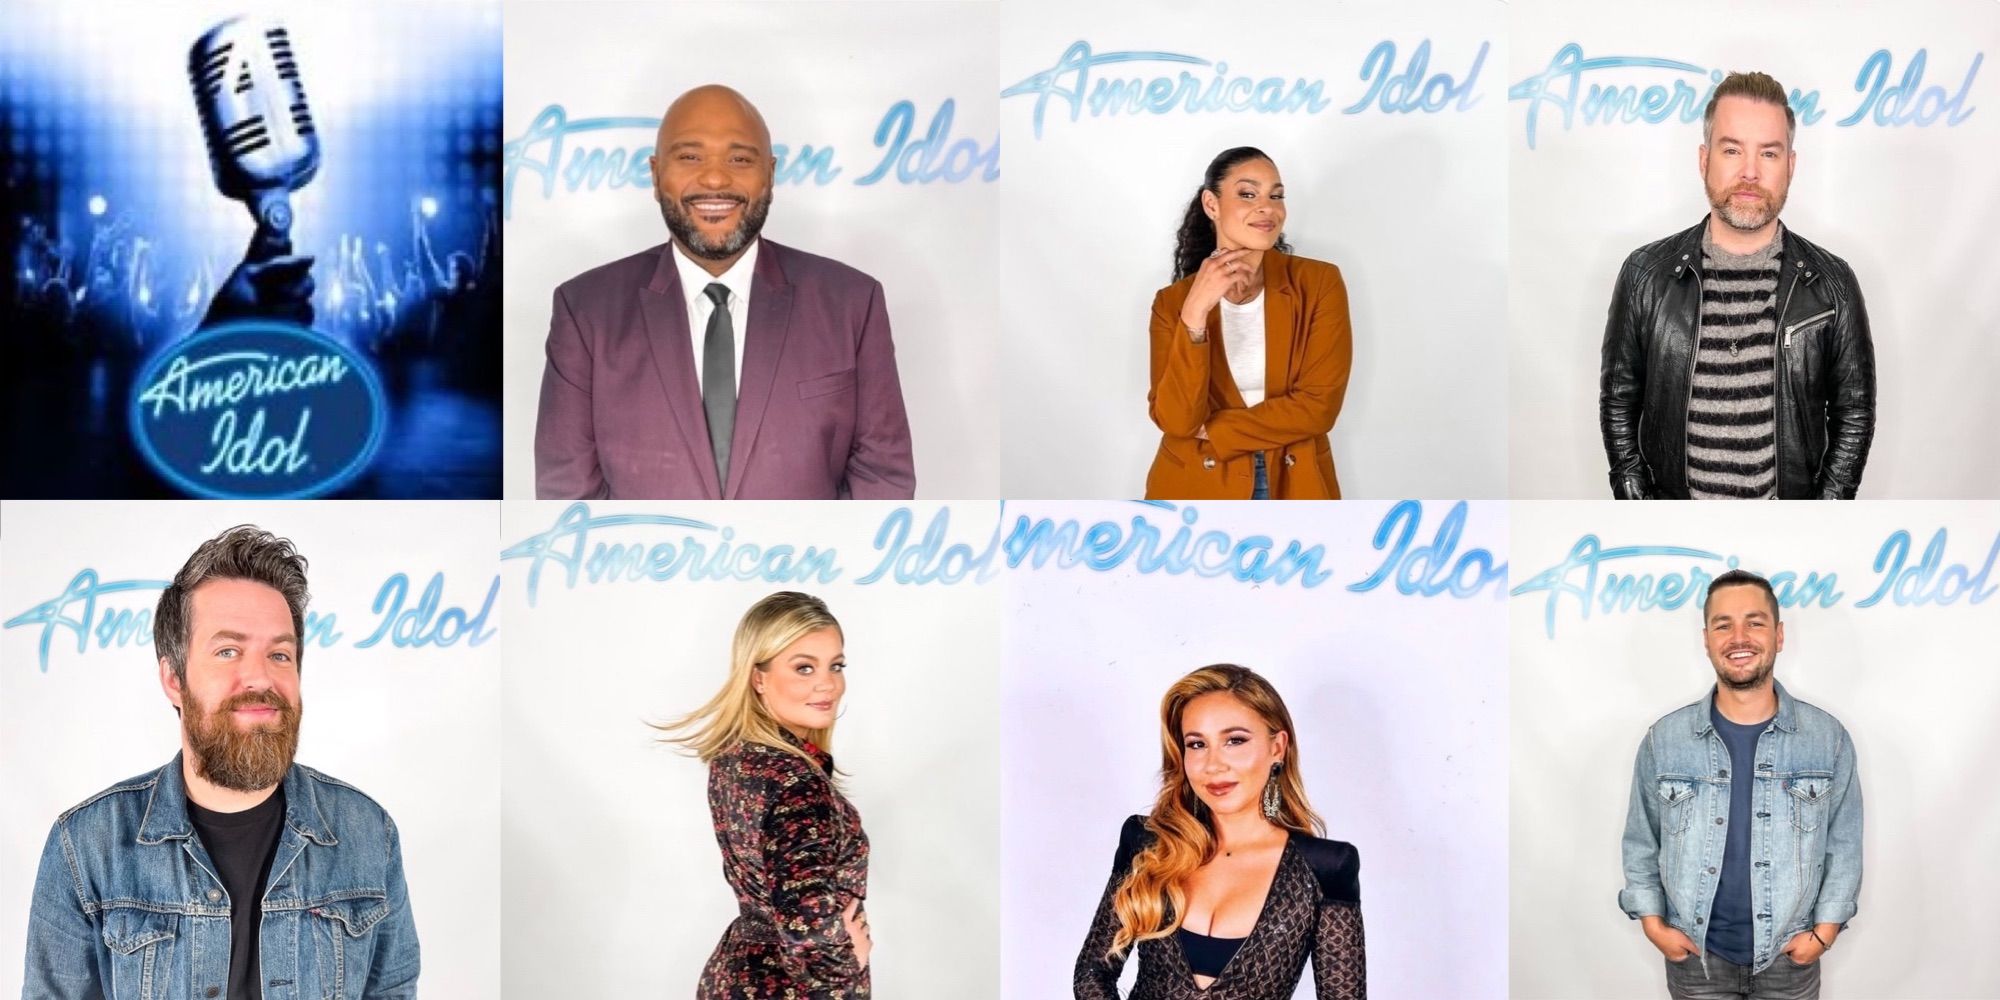 American Idol All About The Hollywood Week Alumni Mentors